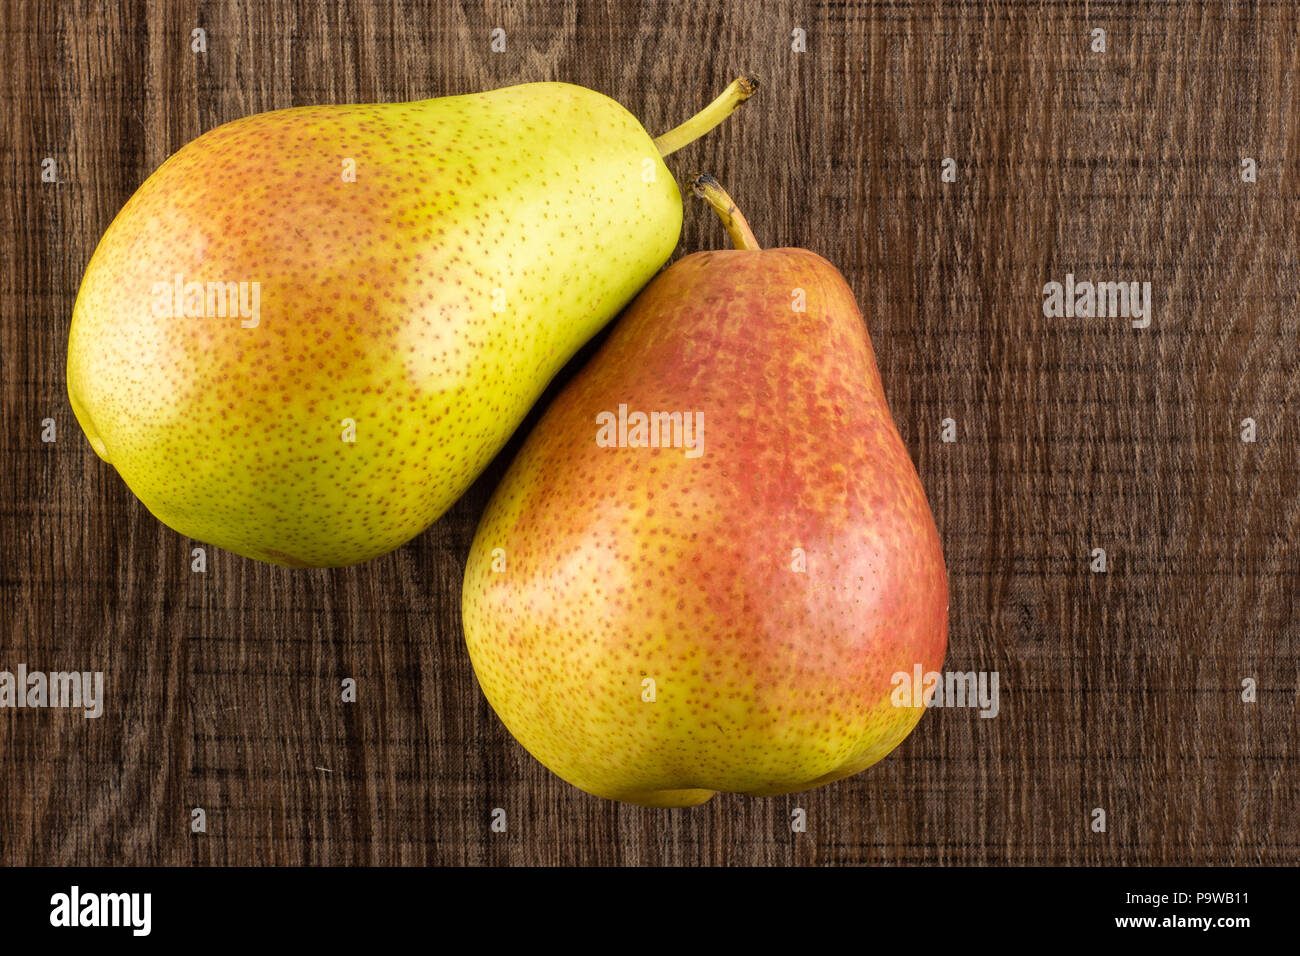 Group of two whole fresh red pear forelle variety flatlay on brown wood Stock Photo